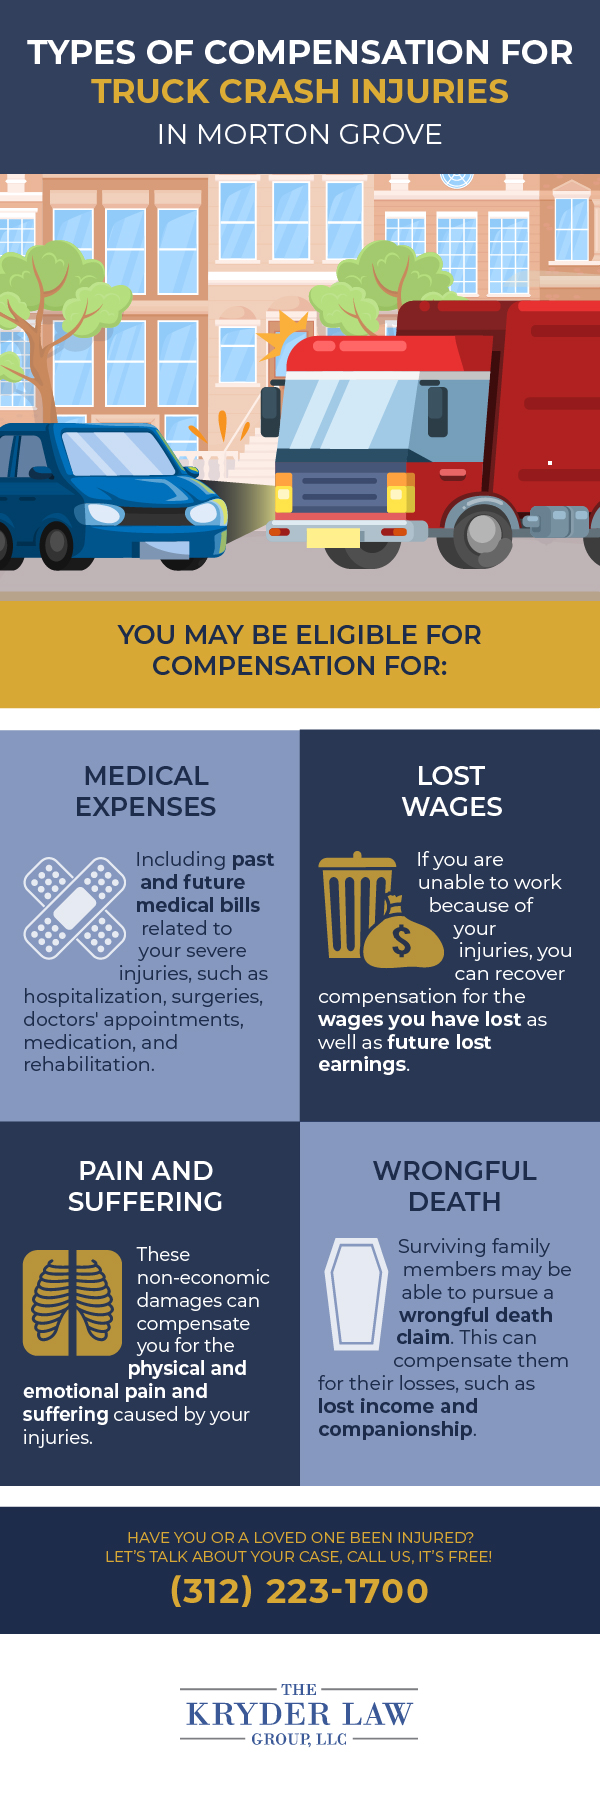 The Benefits of Hiring a Morton Grove Truck Accident Lawyer Infographic